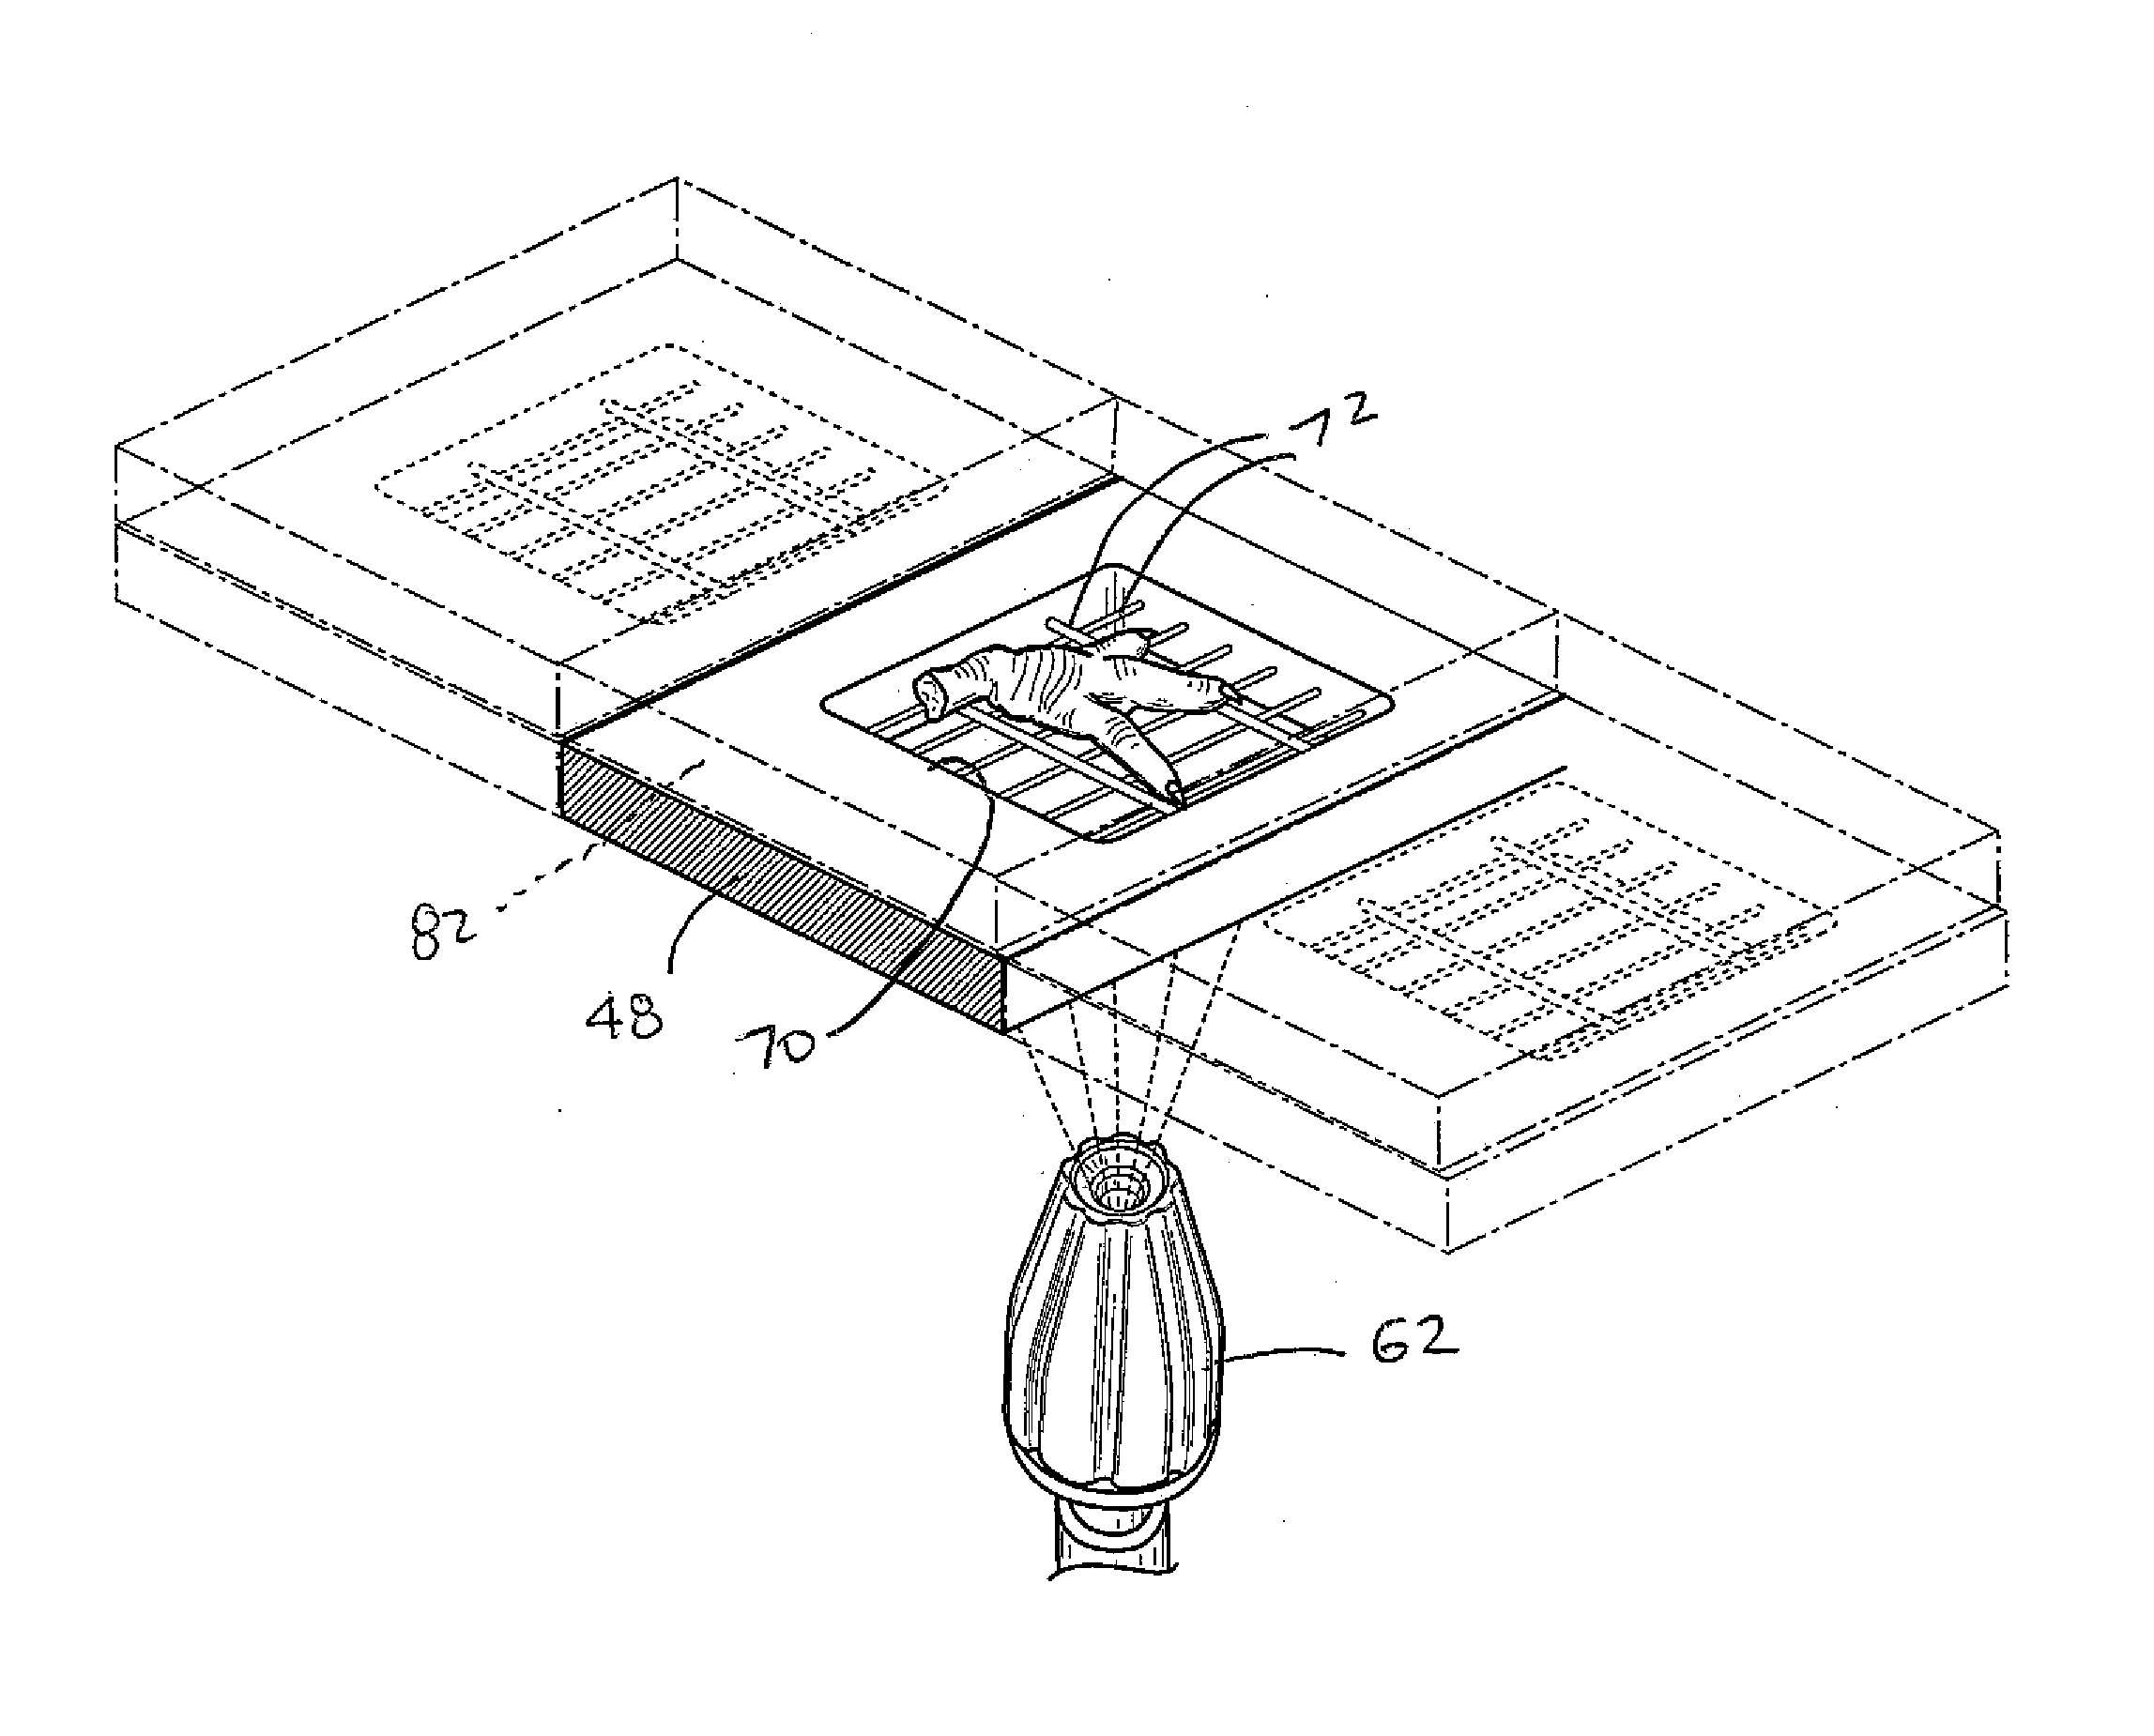 Device for Removing Material from Feet of Poultry